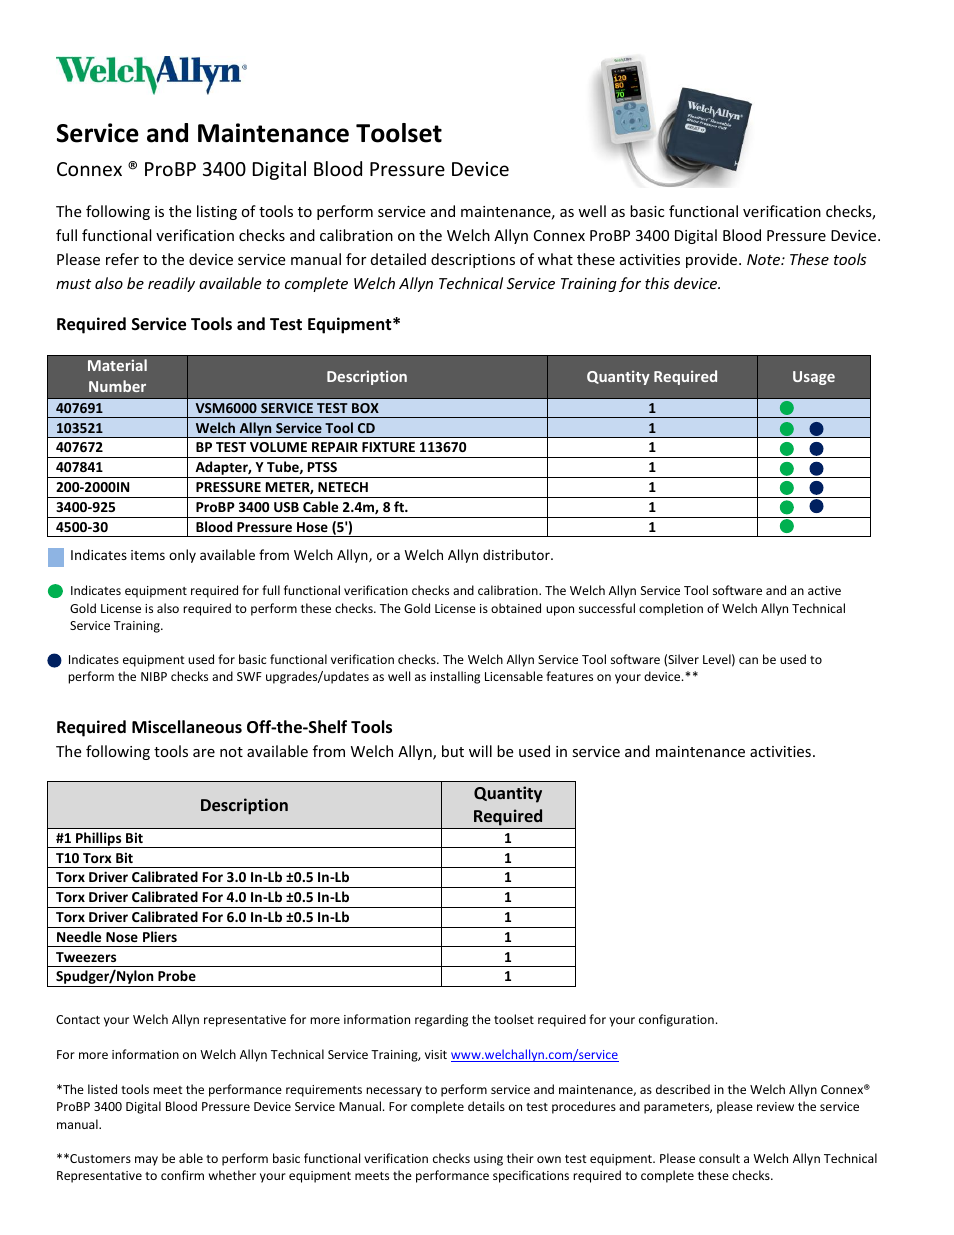 Connex ProBP 3400, Required Service Tools and Test Equipment - Quick Reference Guide